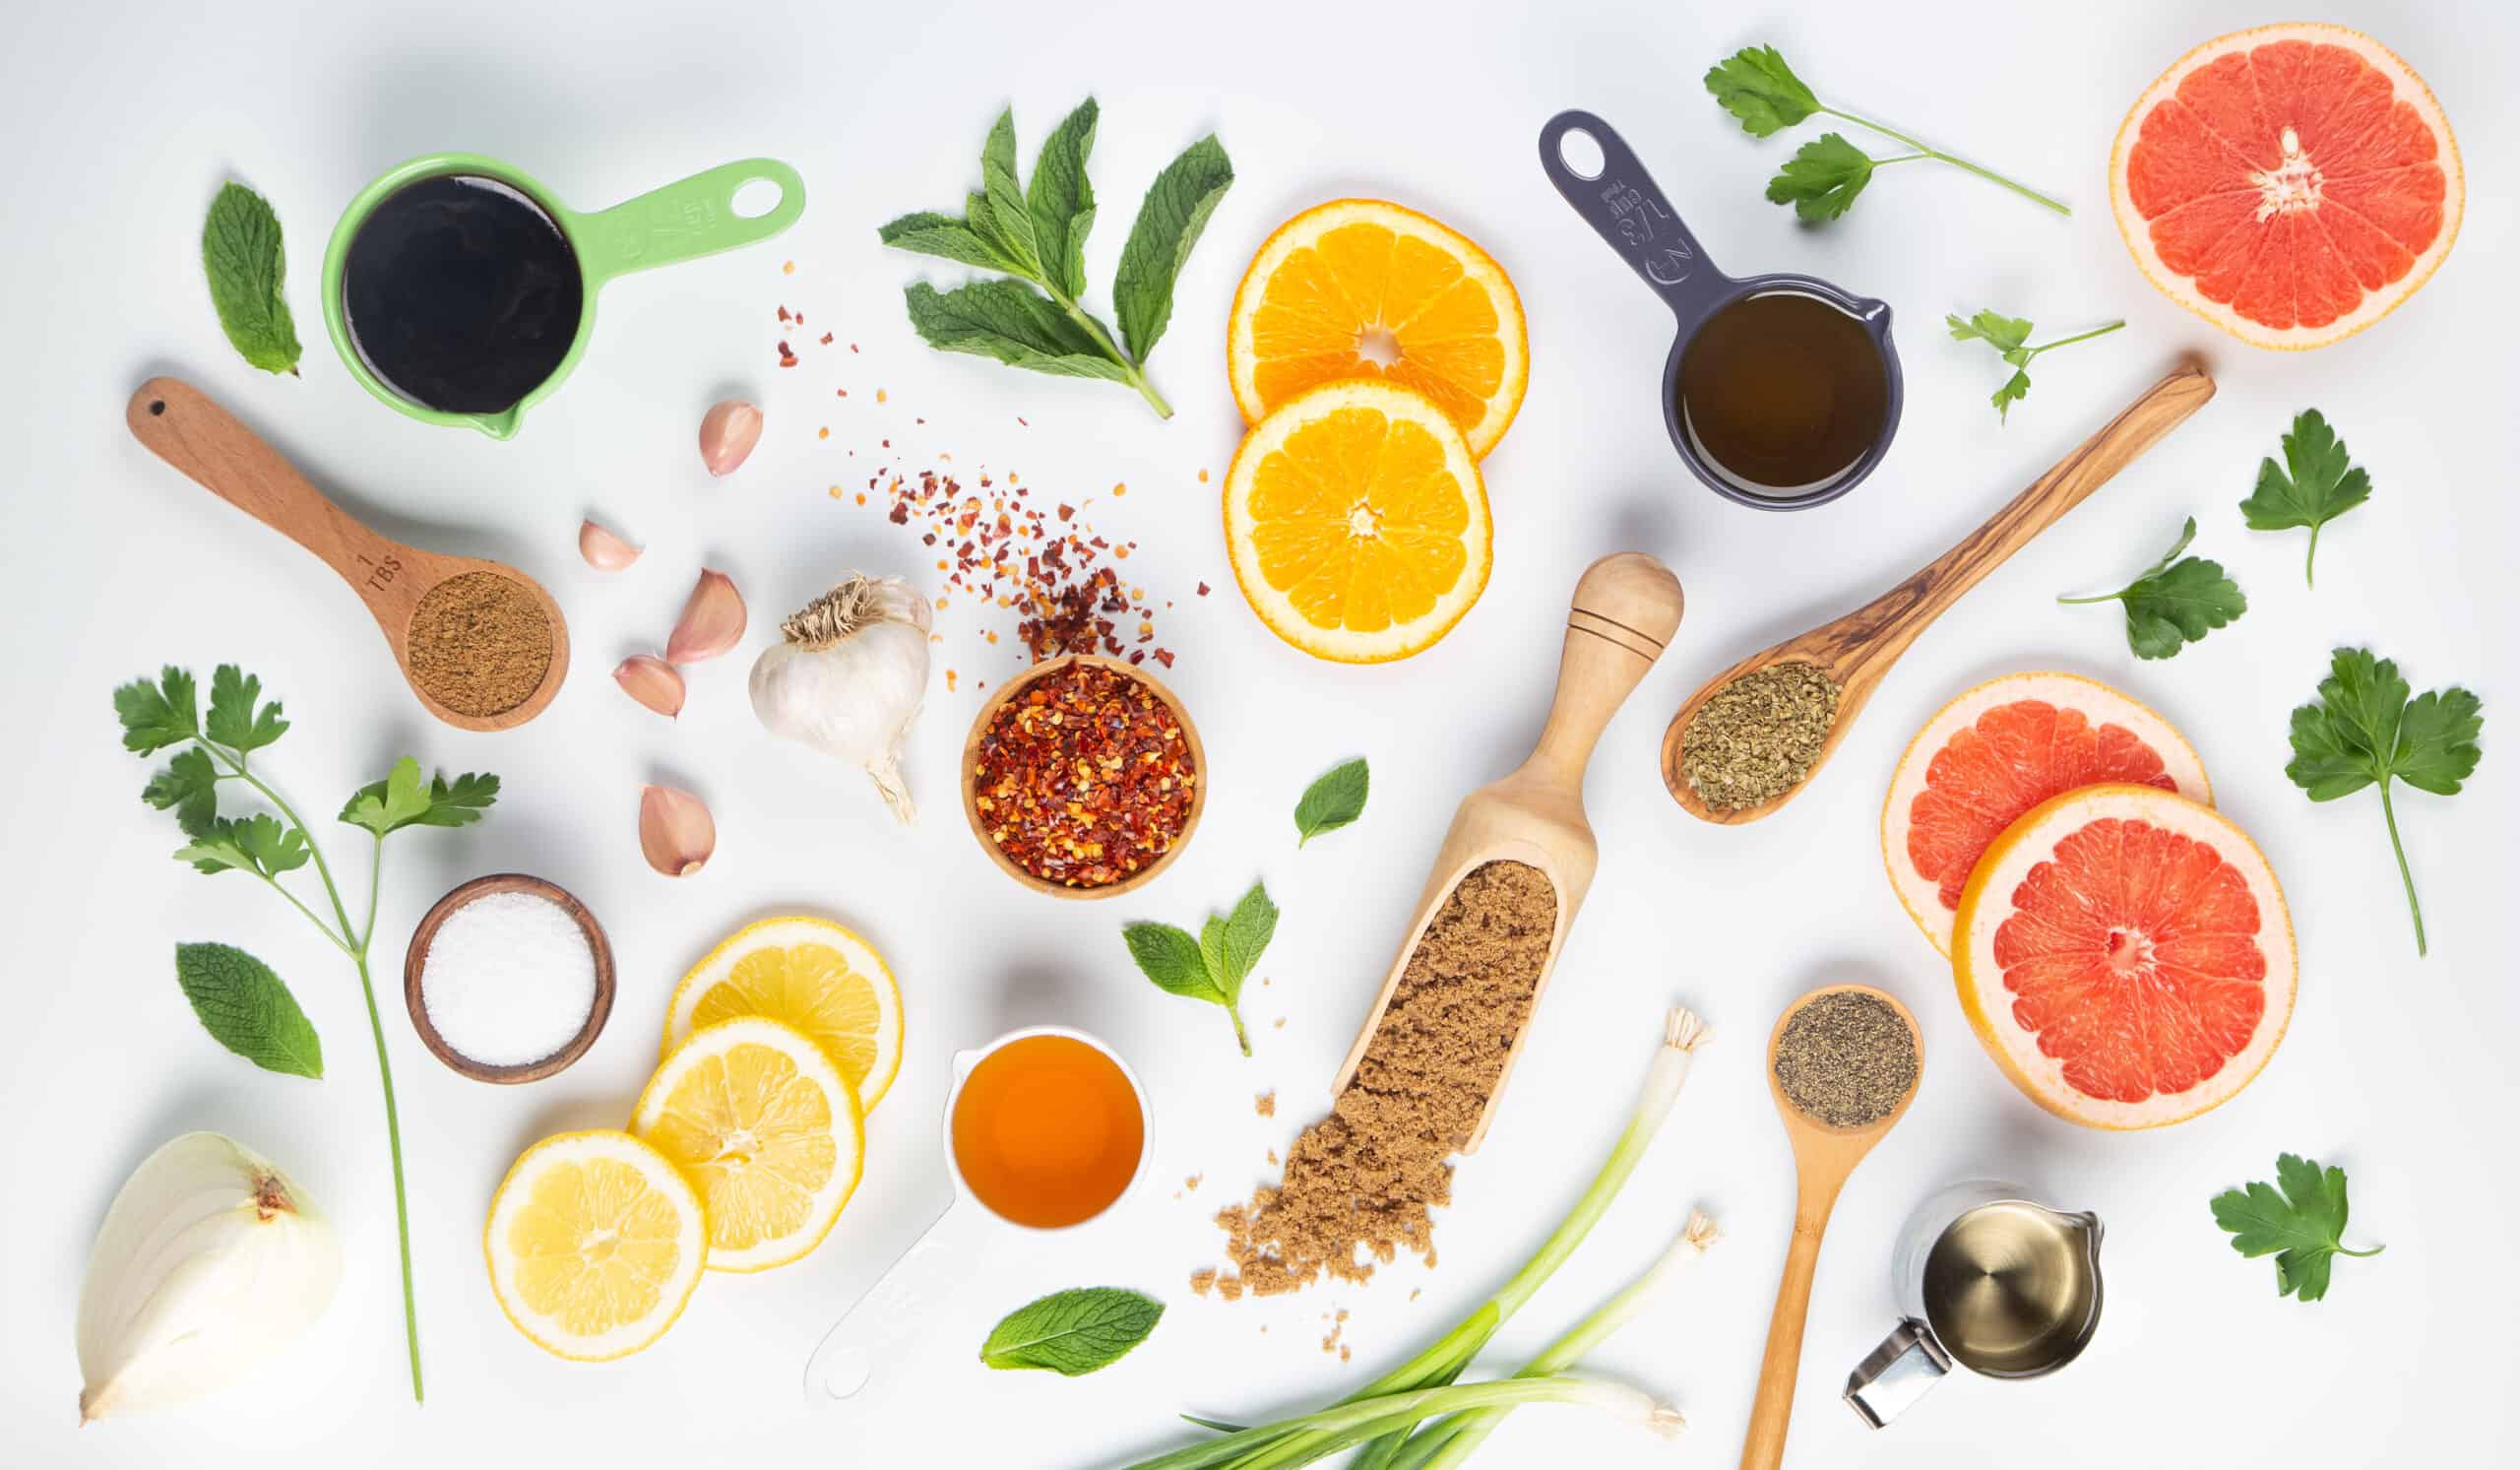 Spices, fruit and herbs